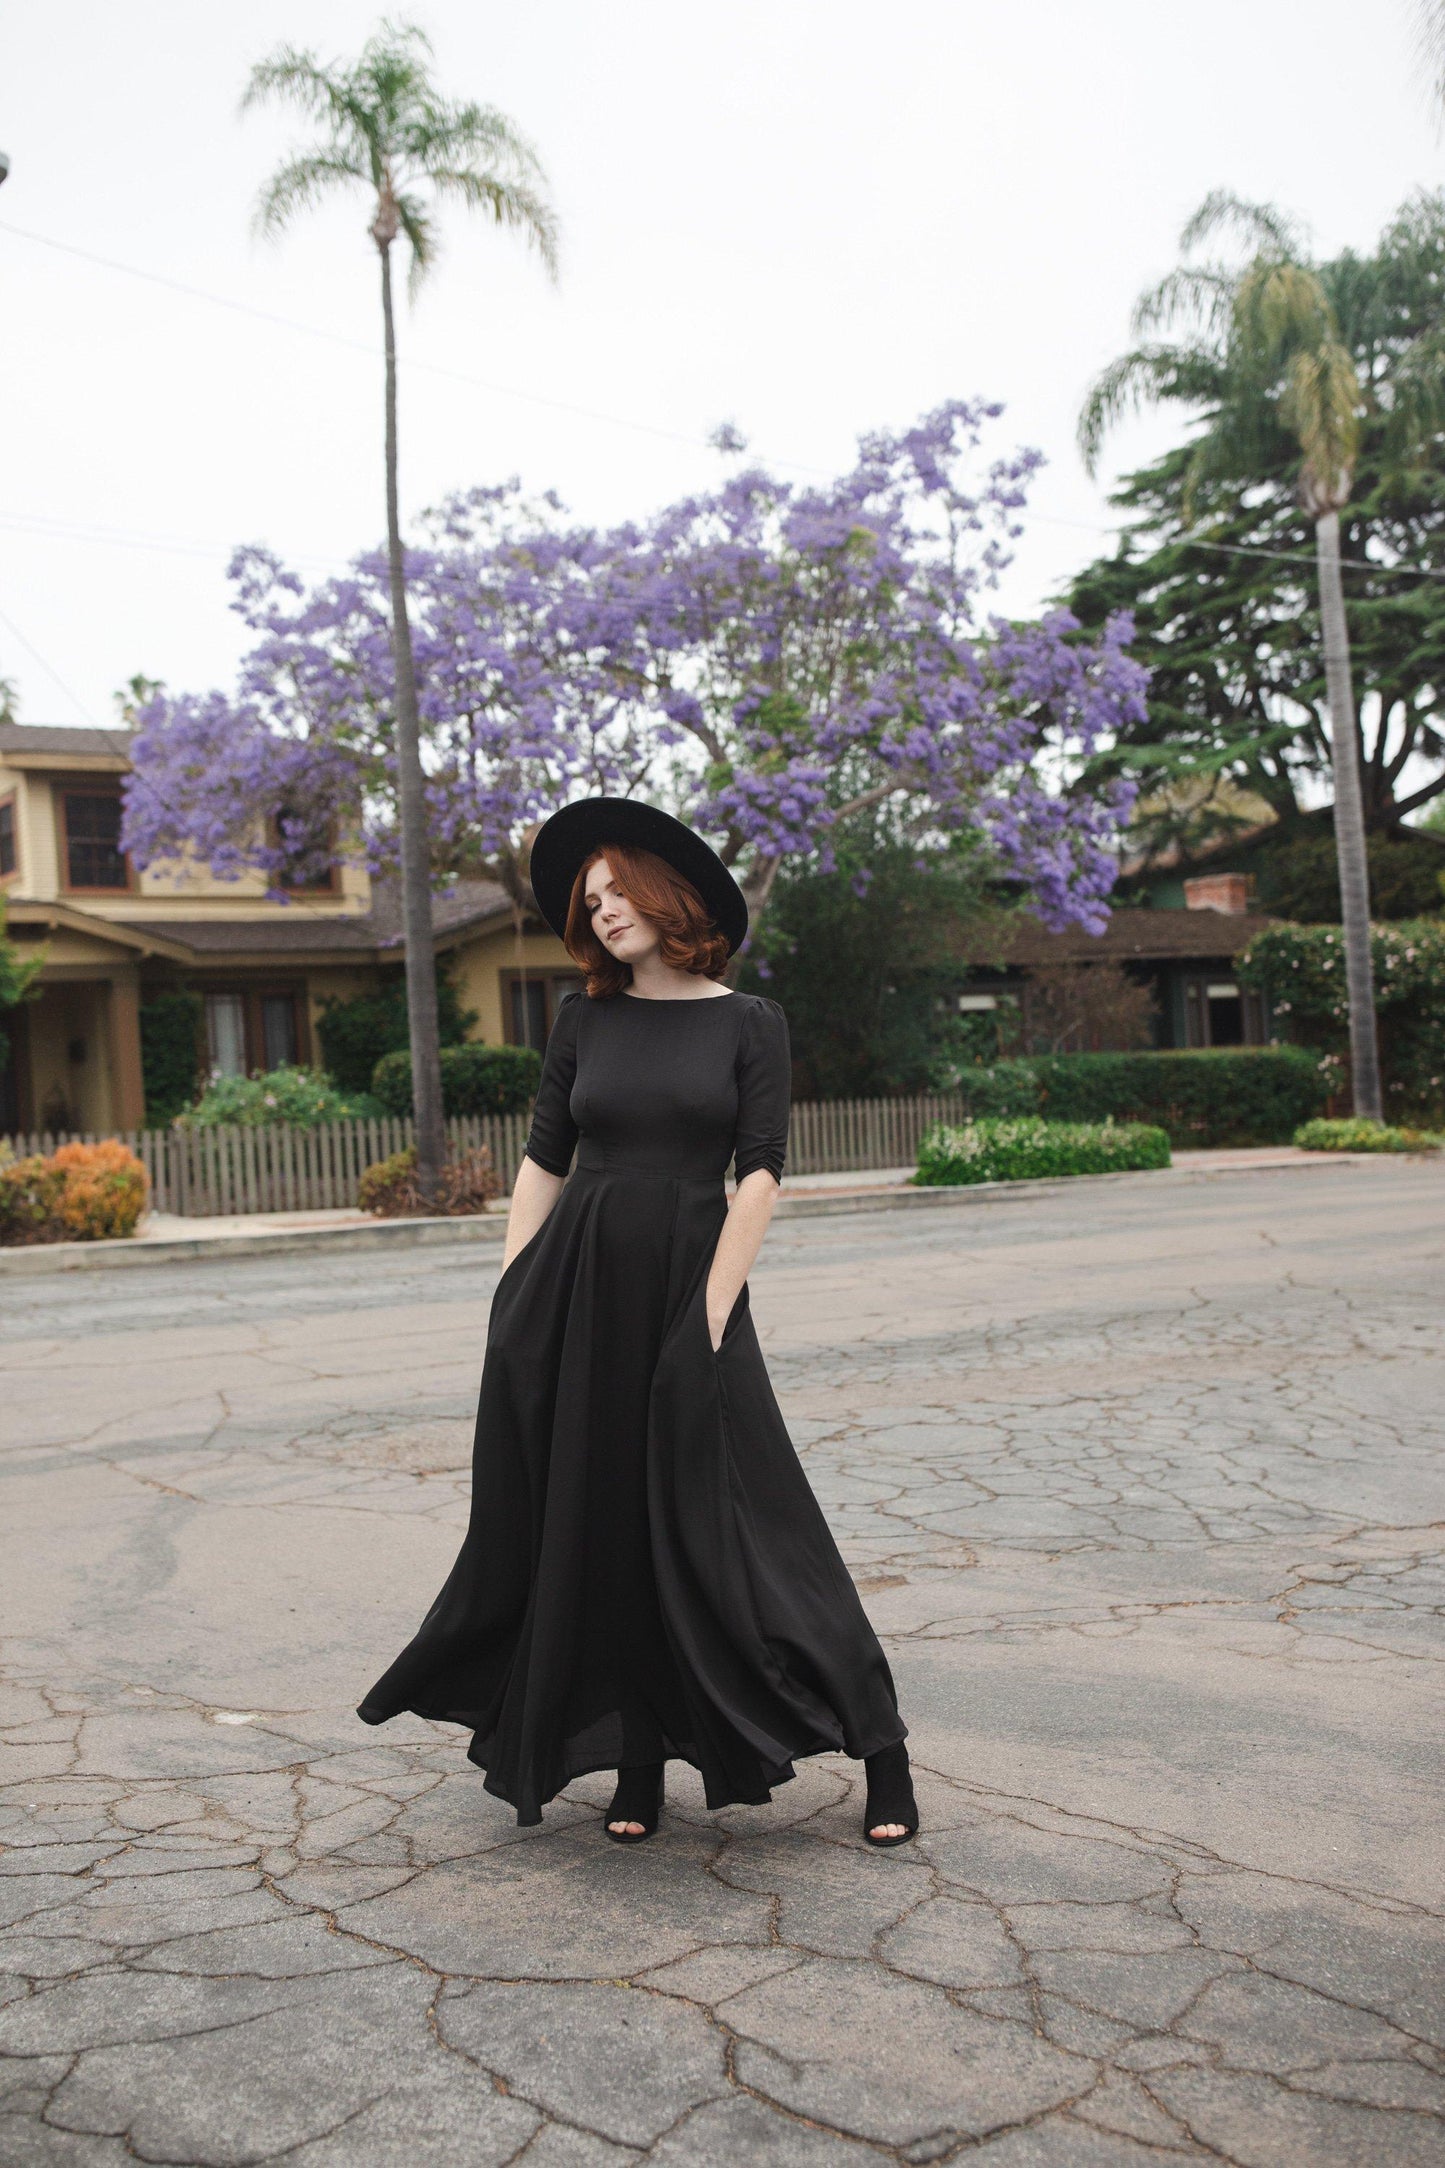 Jennafer Grace solid black maxi dress features princess seamed skirts and pockets. The dress has an invisible zipper and high/low neck options you can wear it multiple ways. Fitted torso with elbow length sleeves and ankle hem. 